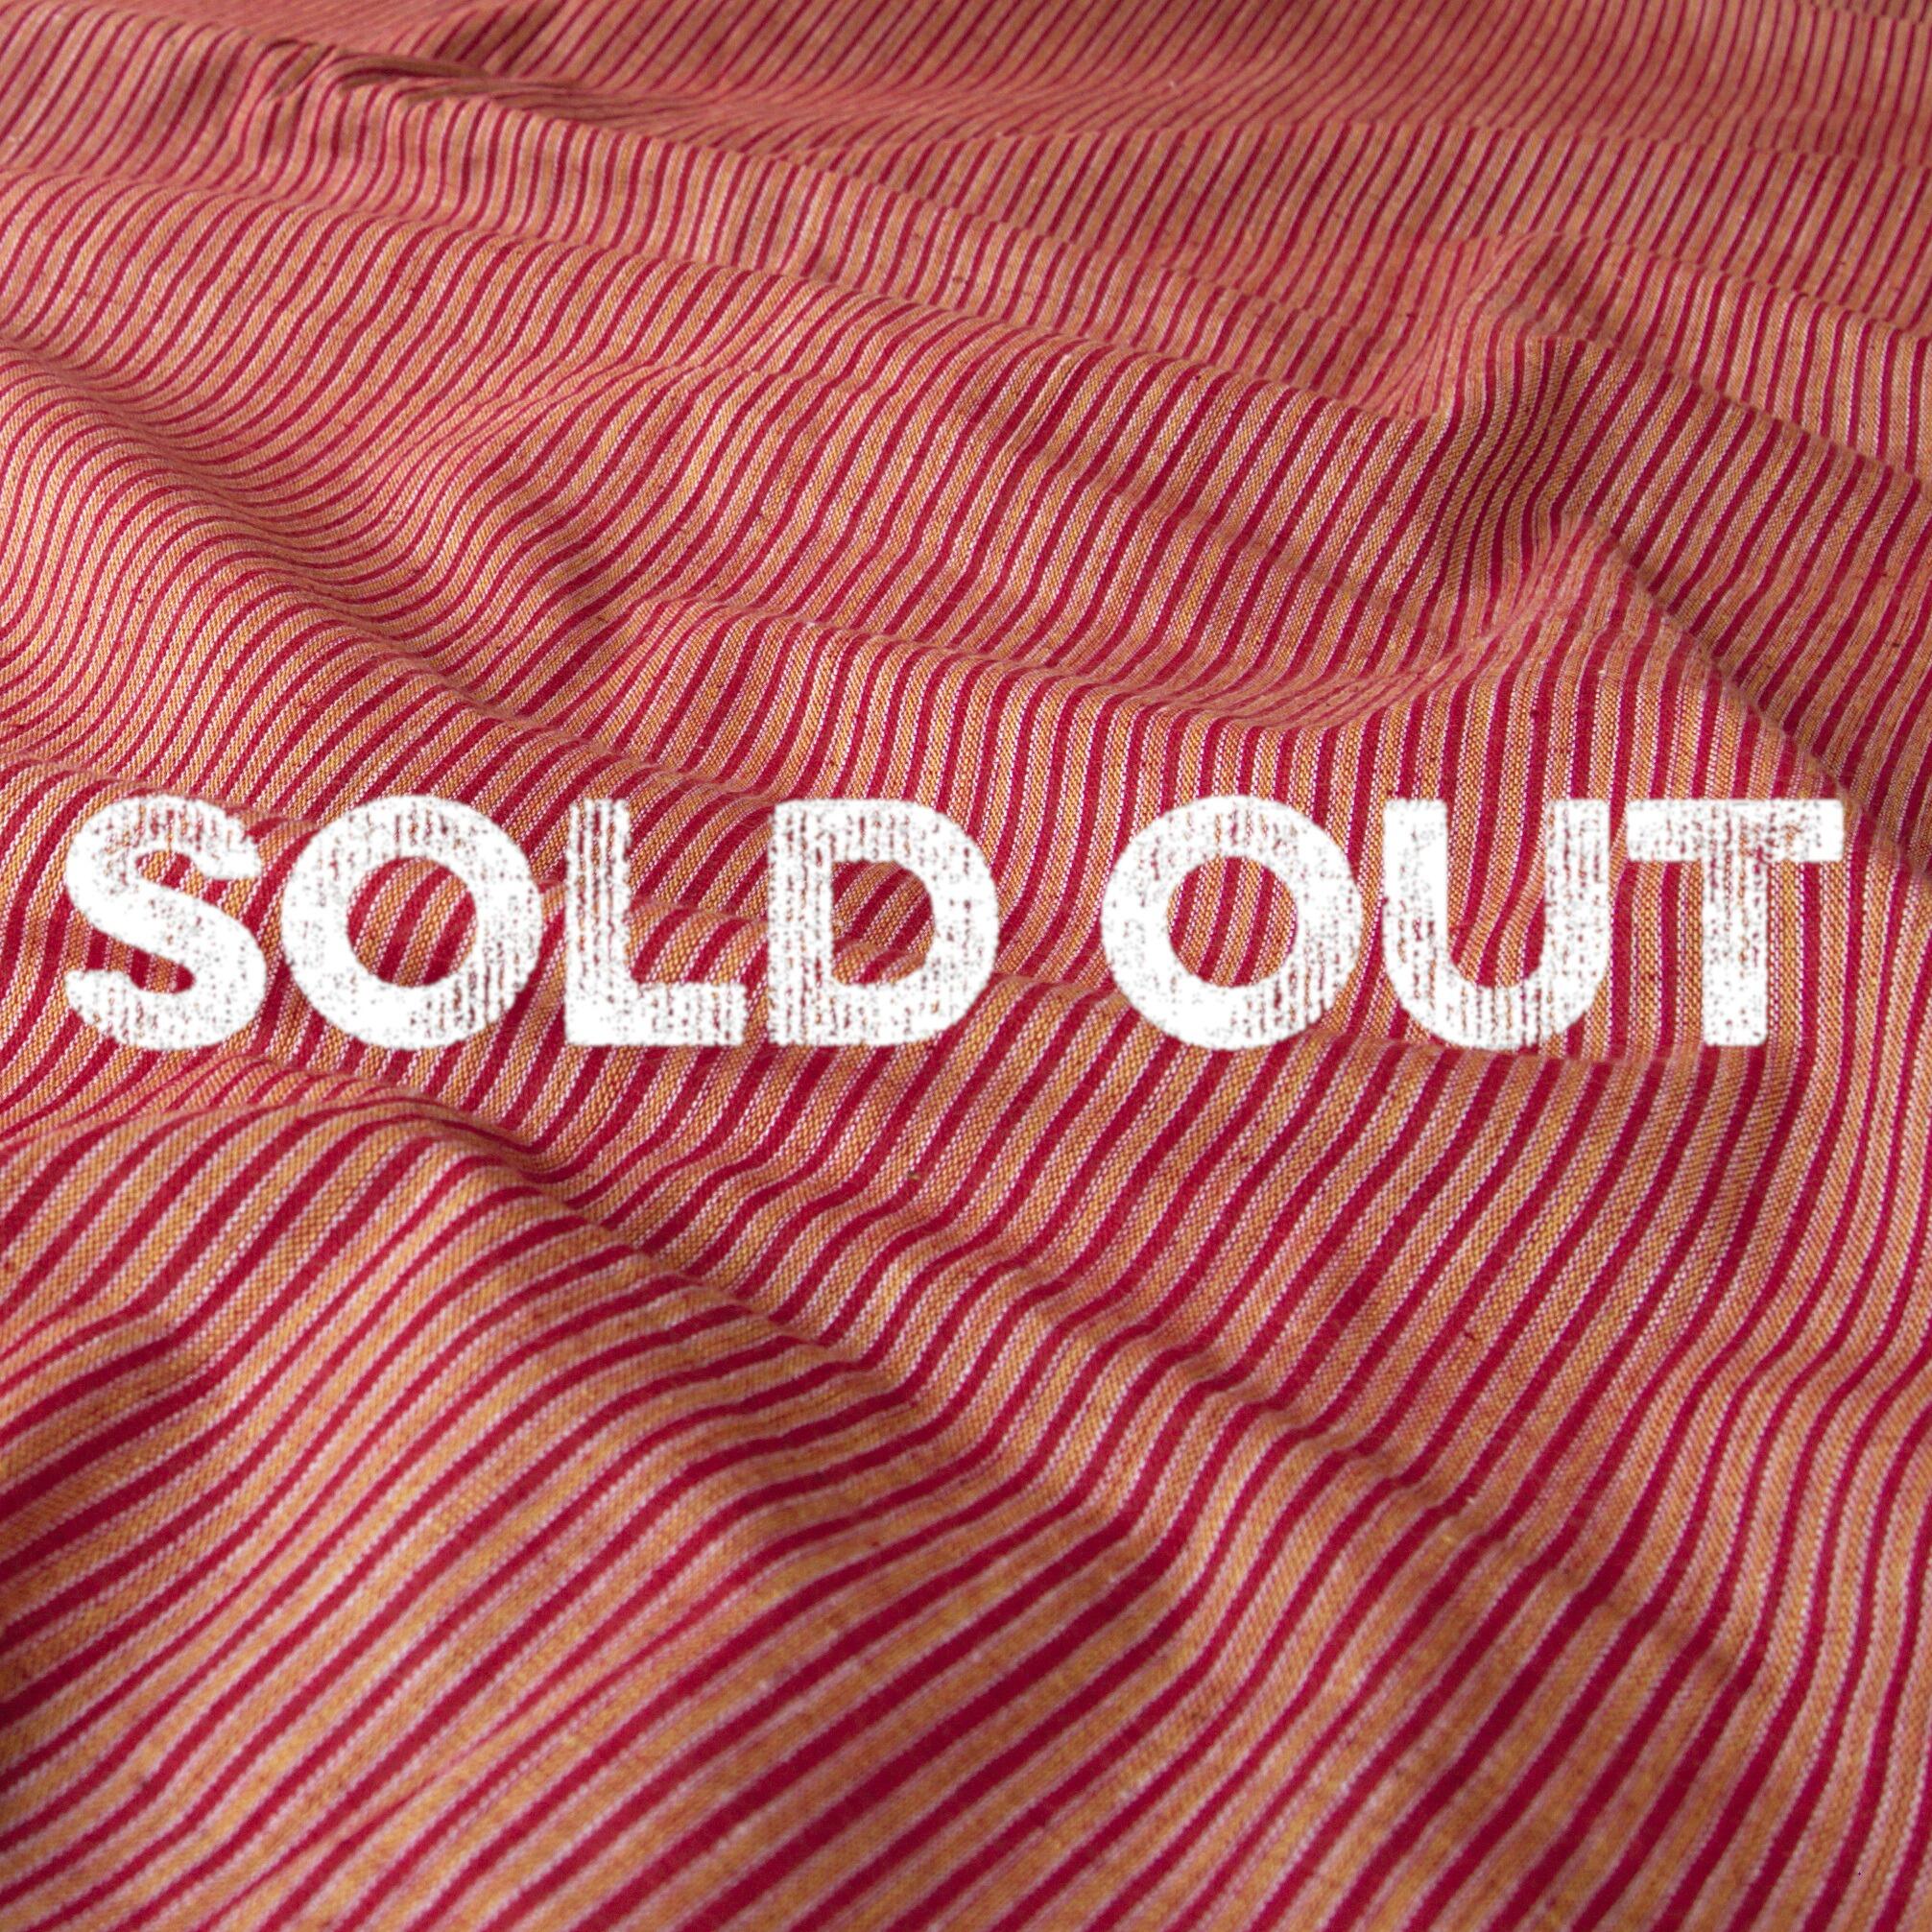 100% Handloom Woven Cotton - Double Stripes - Alizarin Red Warp & Weft, White and Pomegranate Yellow Warp - Sold Out